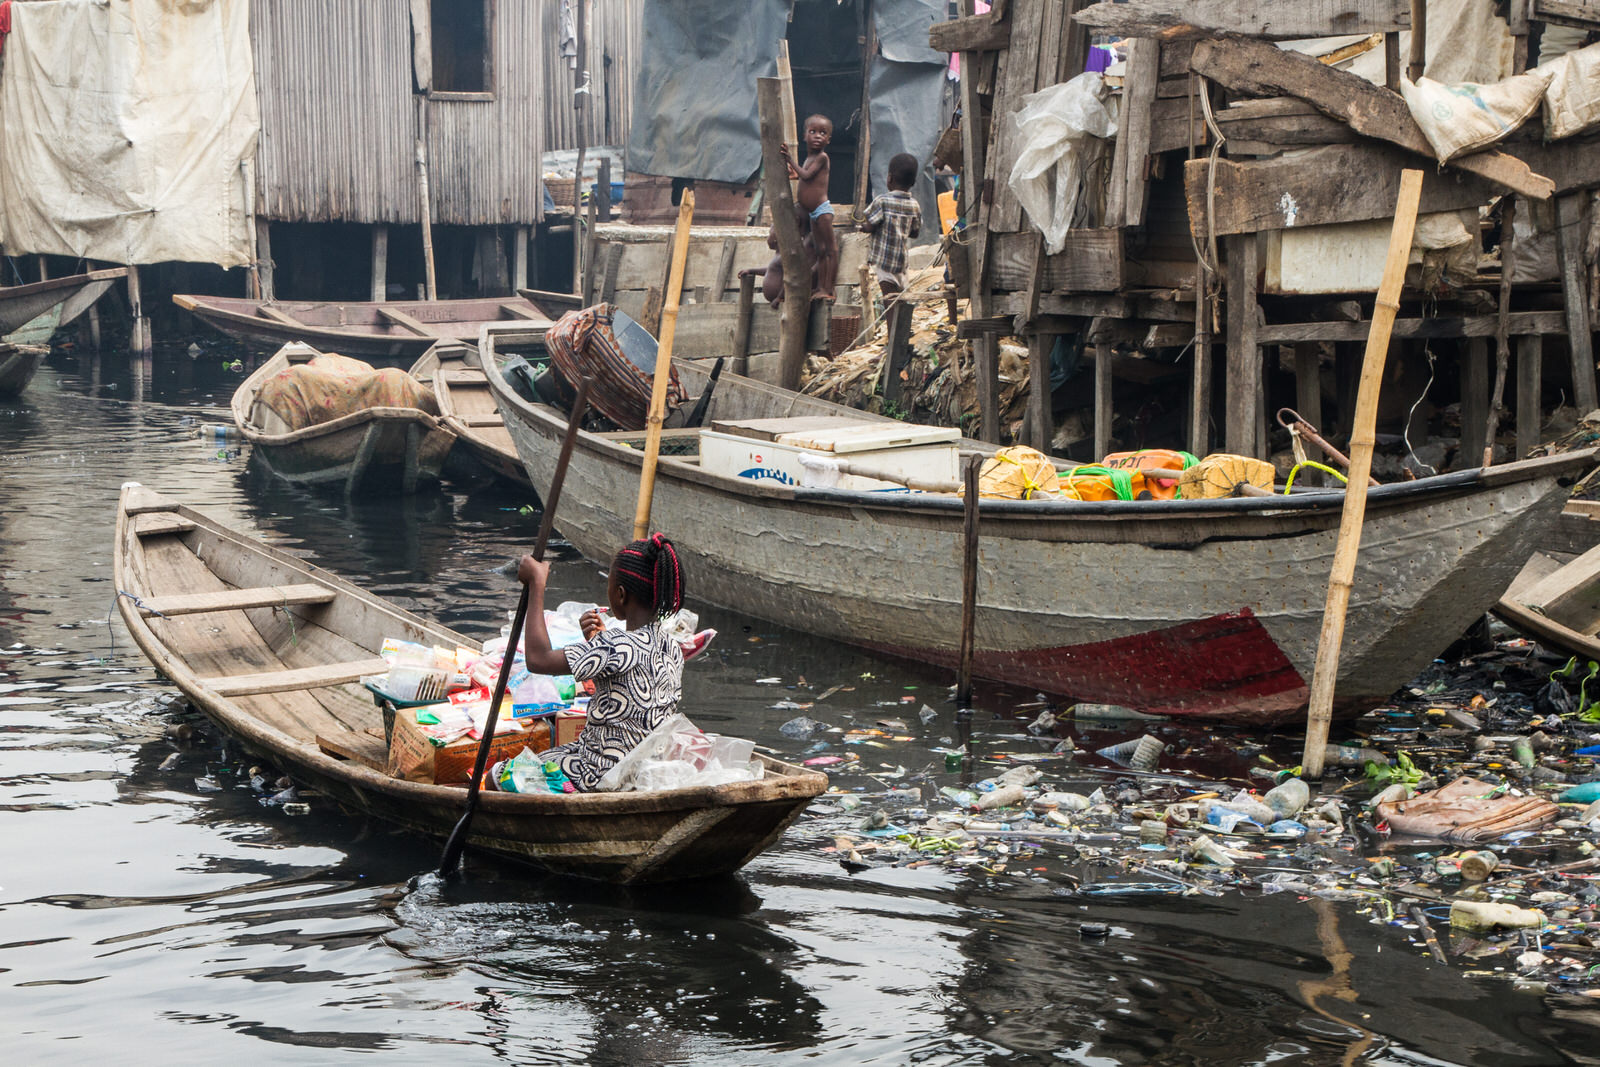  Many evictees have begun to return, though the rising cost of land on the waterfronts of Lagos remain a continued threat for Sogunro as well as Otodo Gbame and many others. 